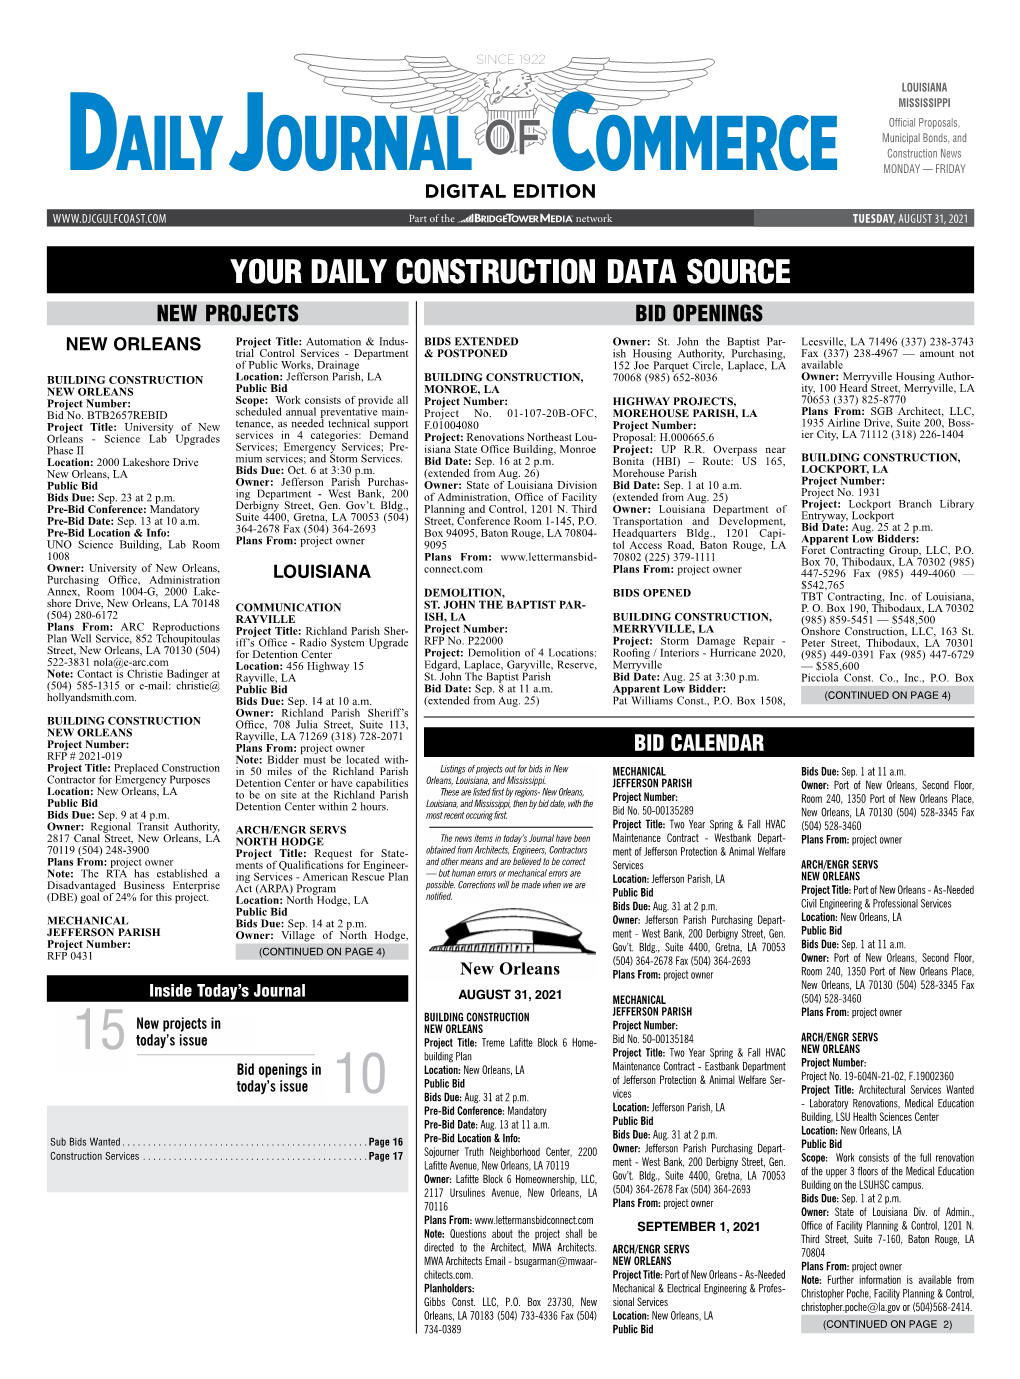 YOUR DAILY CONSTRUCTION DATA SOURCE NEW PROJECTS BID OPENINGS NEW ORLEANS Project Title: Automation & Indus- BIDS EXTENDED Owner: St